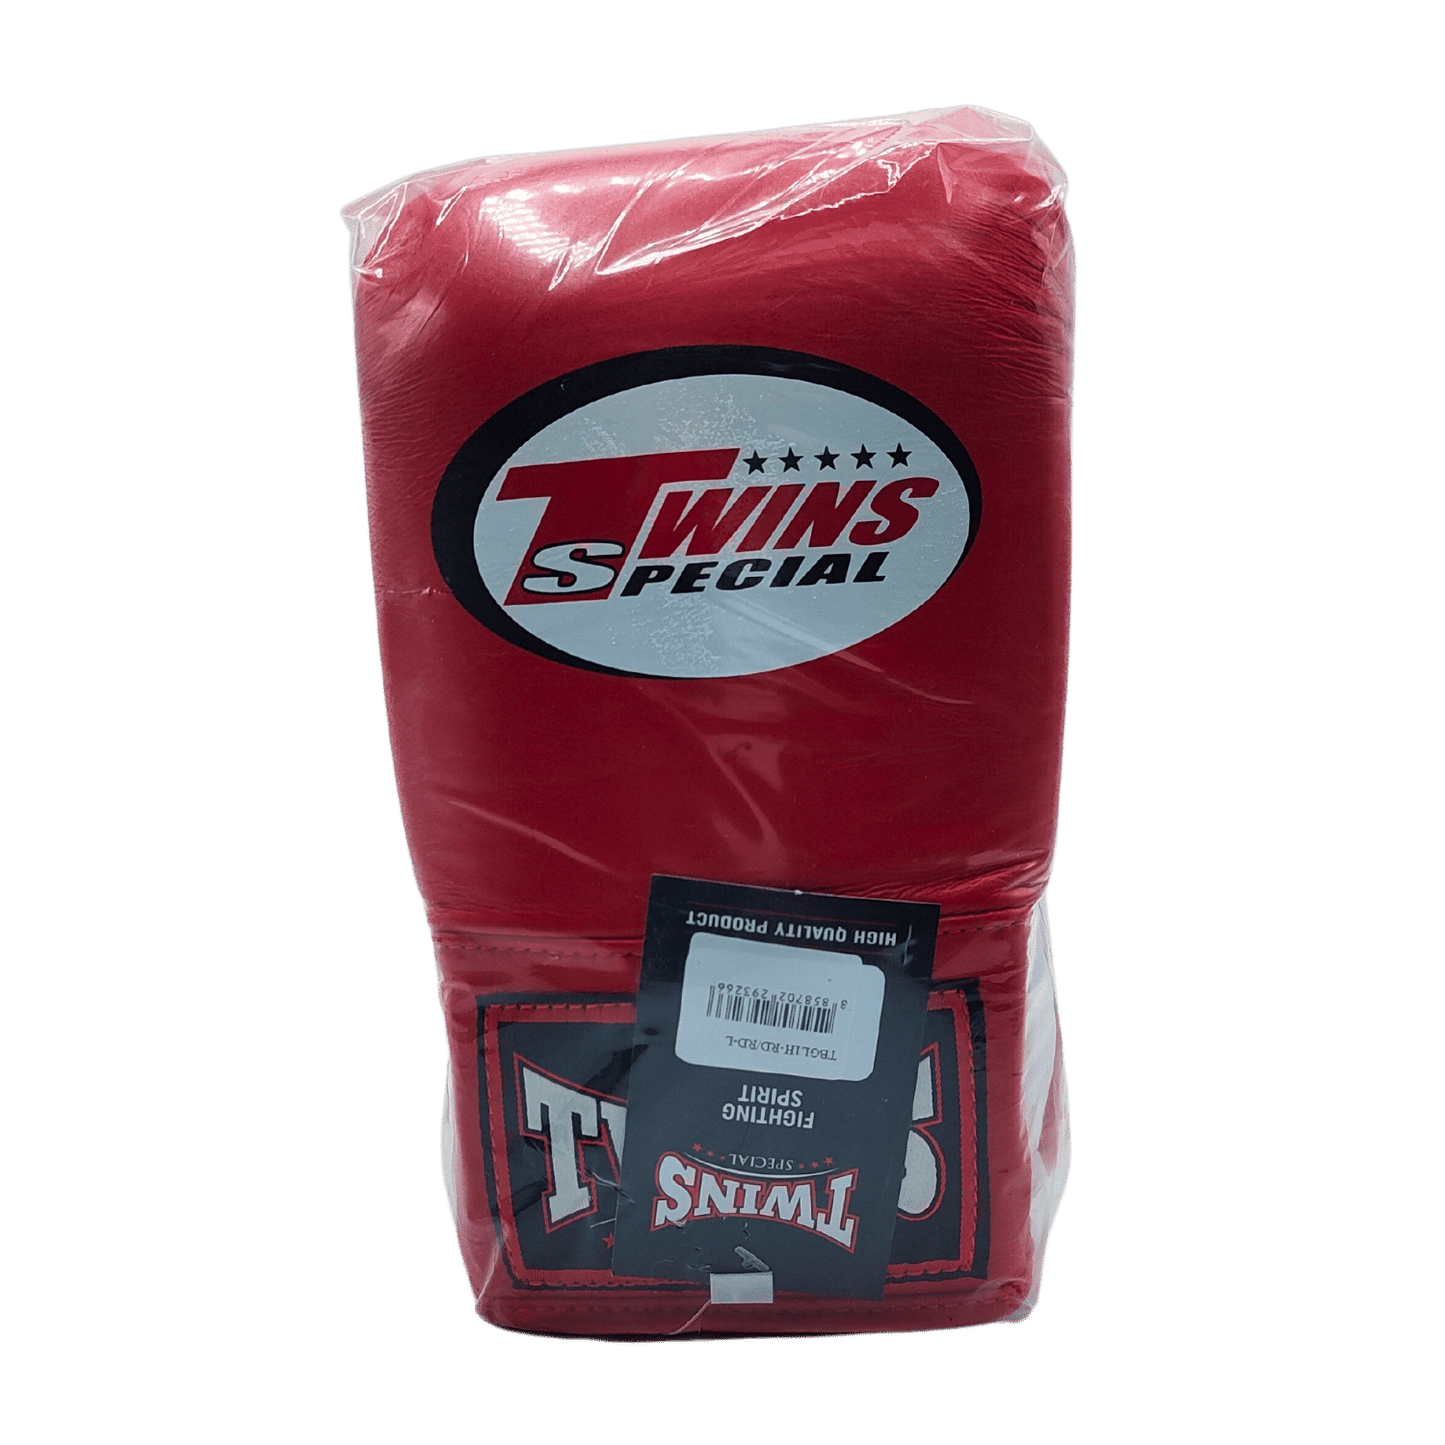 Twins Leather Bag Gloves - Red, perfect for Muay Thai enthusiasts at Al's Gym.